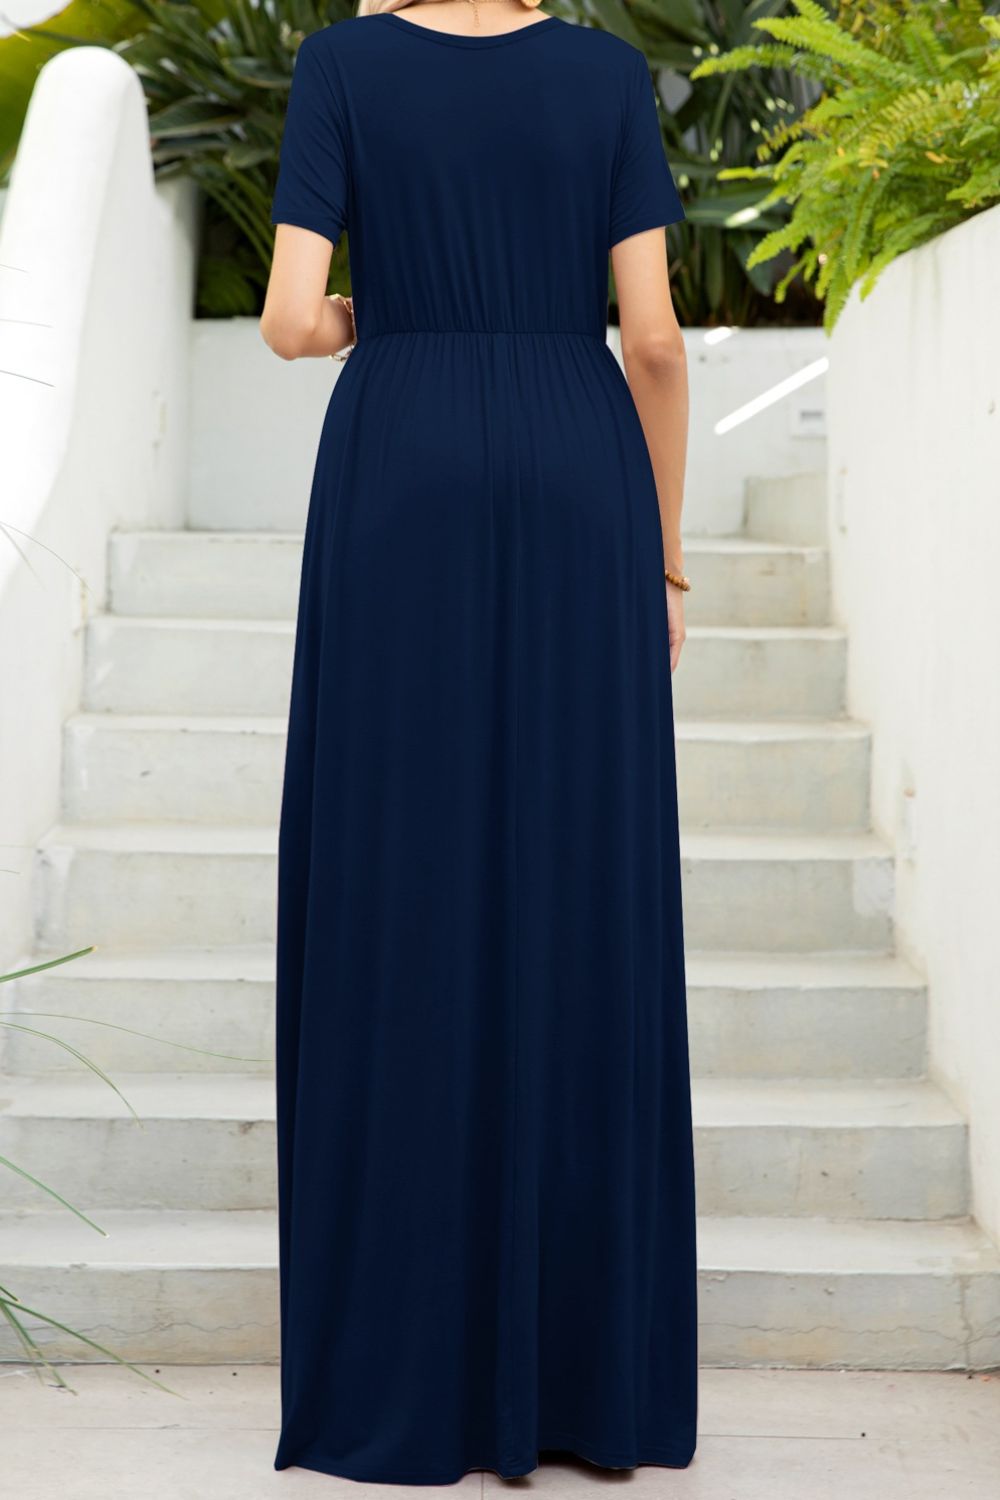 Women's Full Size Round Neck Maxi Tee Dress with Pockets